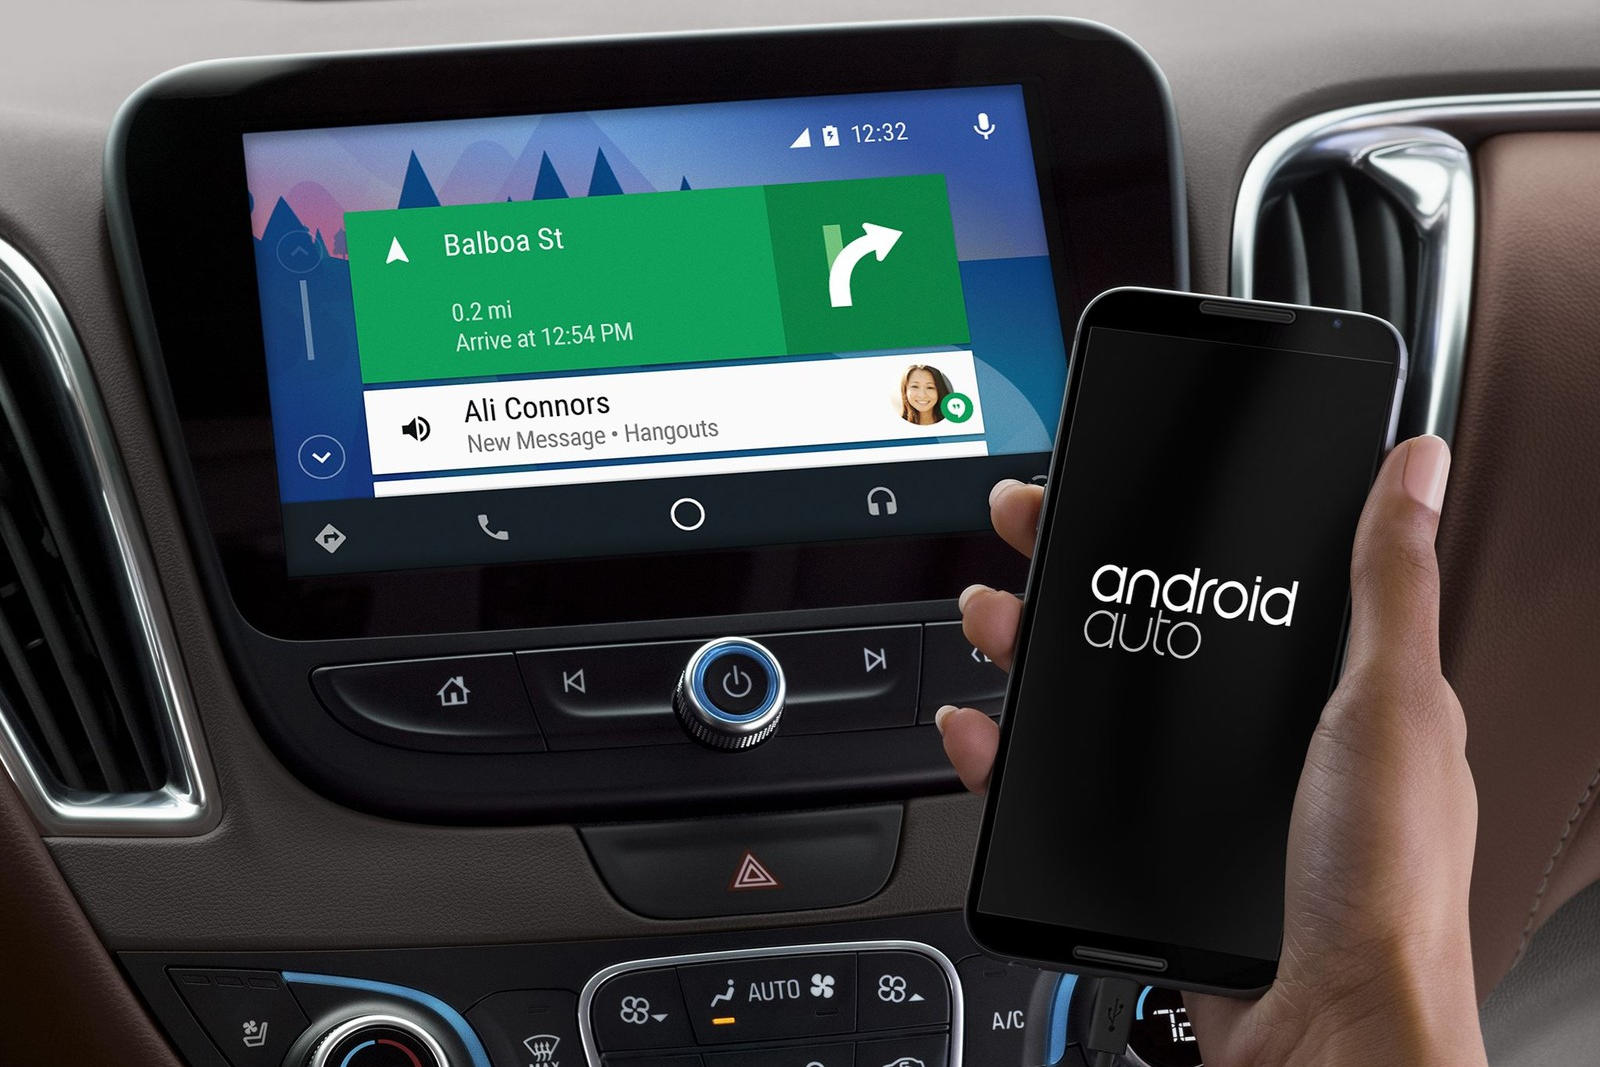 How To Use Android Auto - Smartphone Integrartion